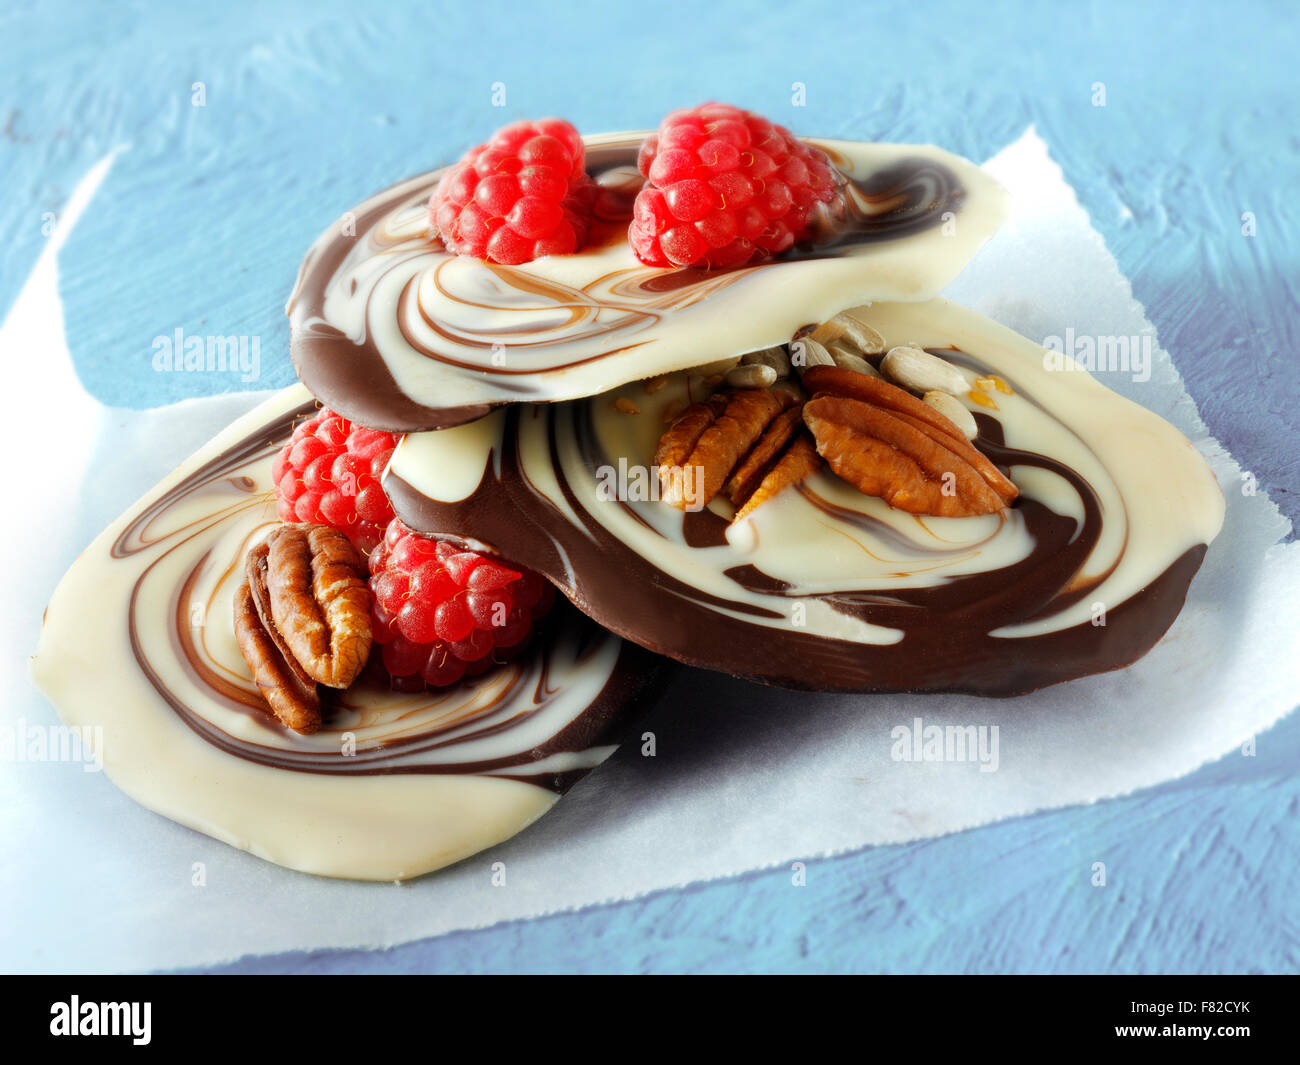 Melted milk and white chocolate swirls recipe with fruit and nuts Stock Photo